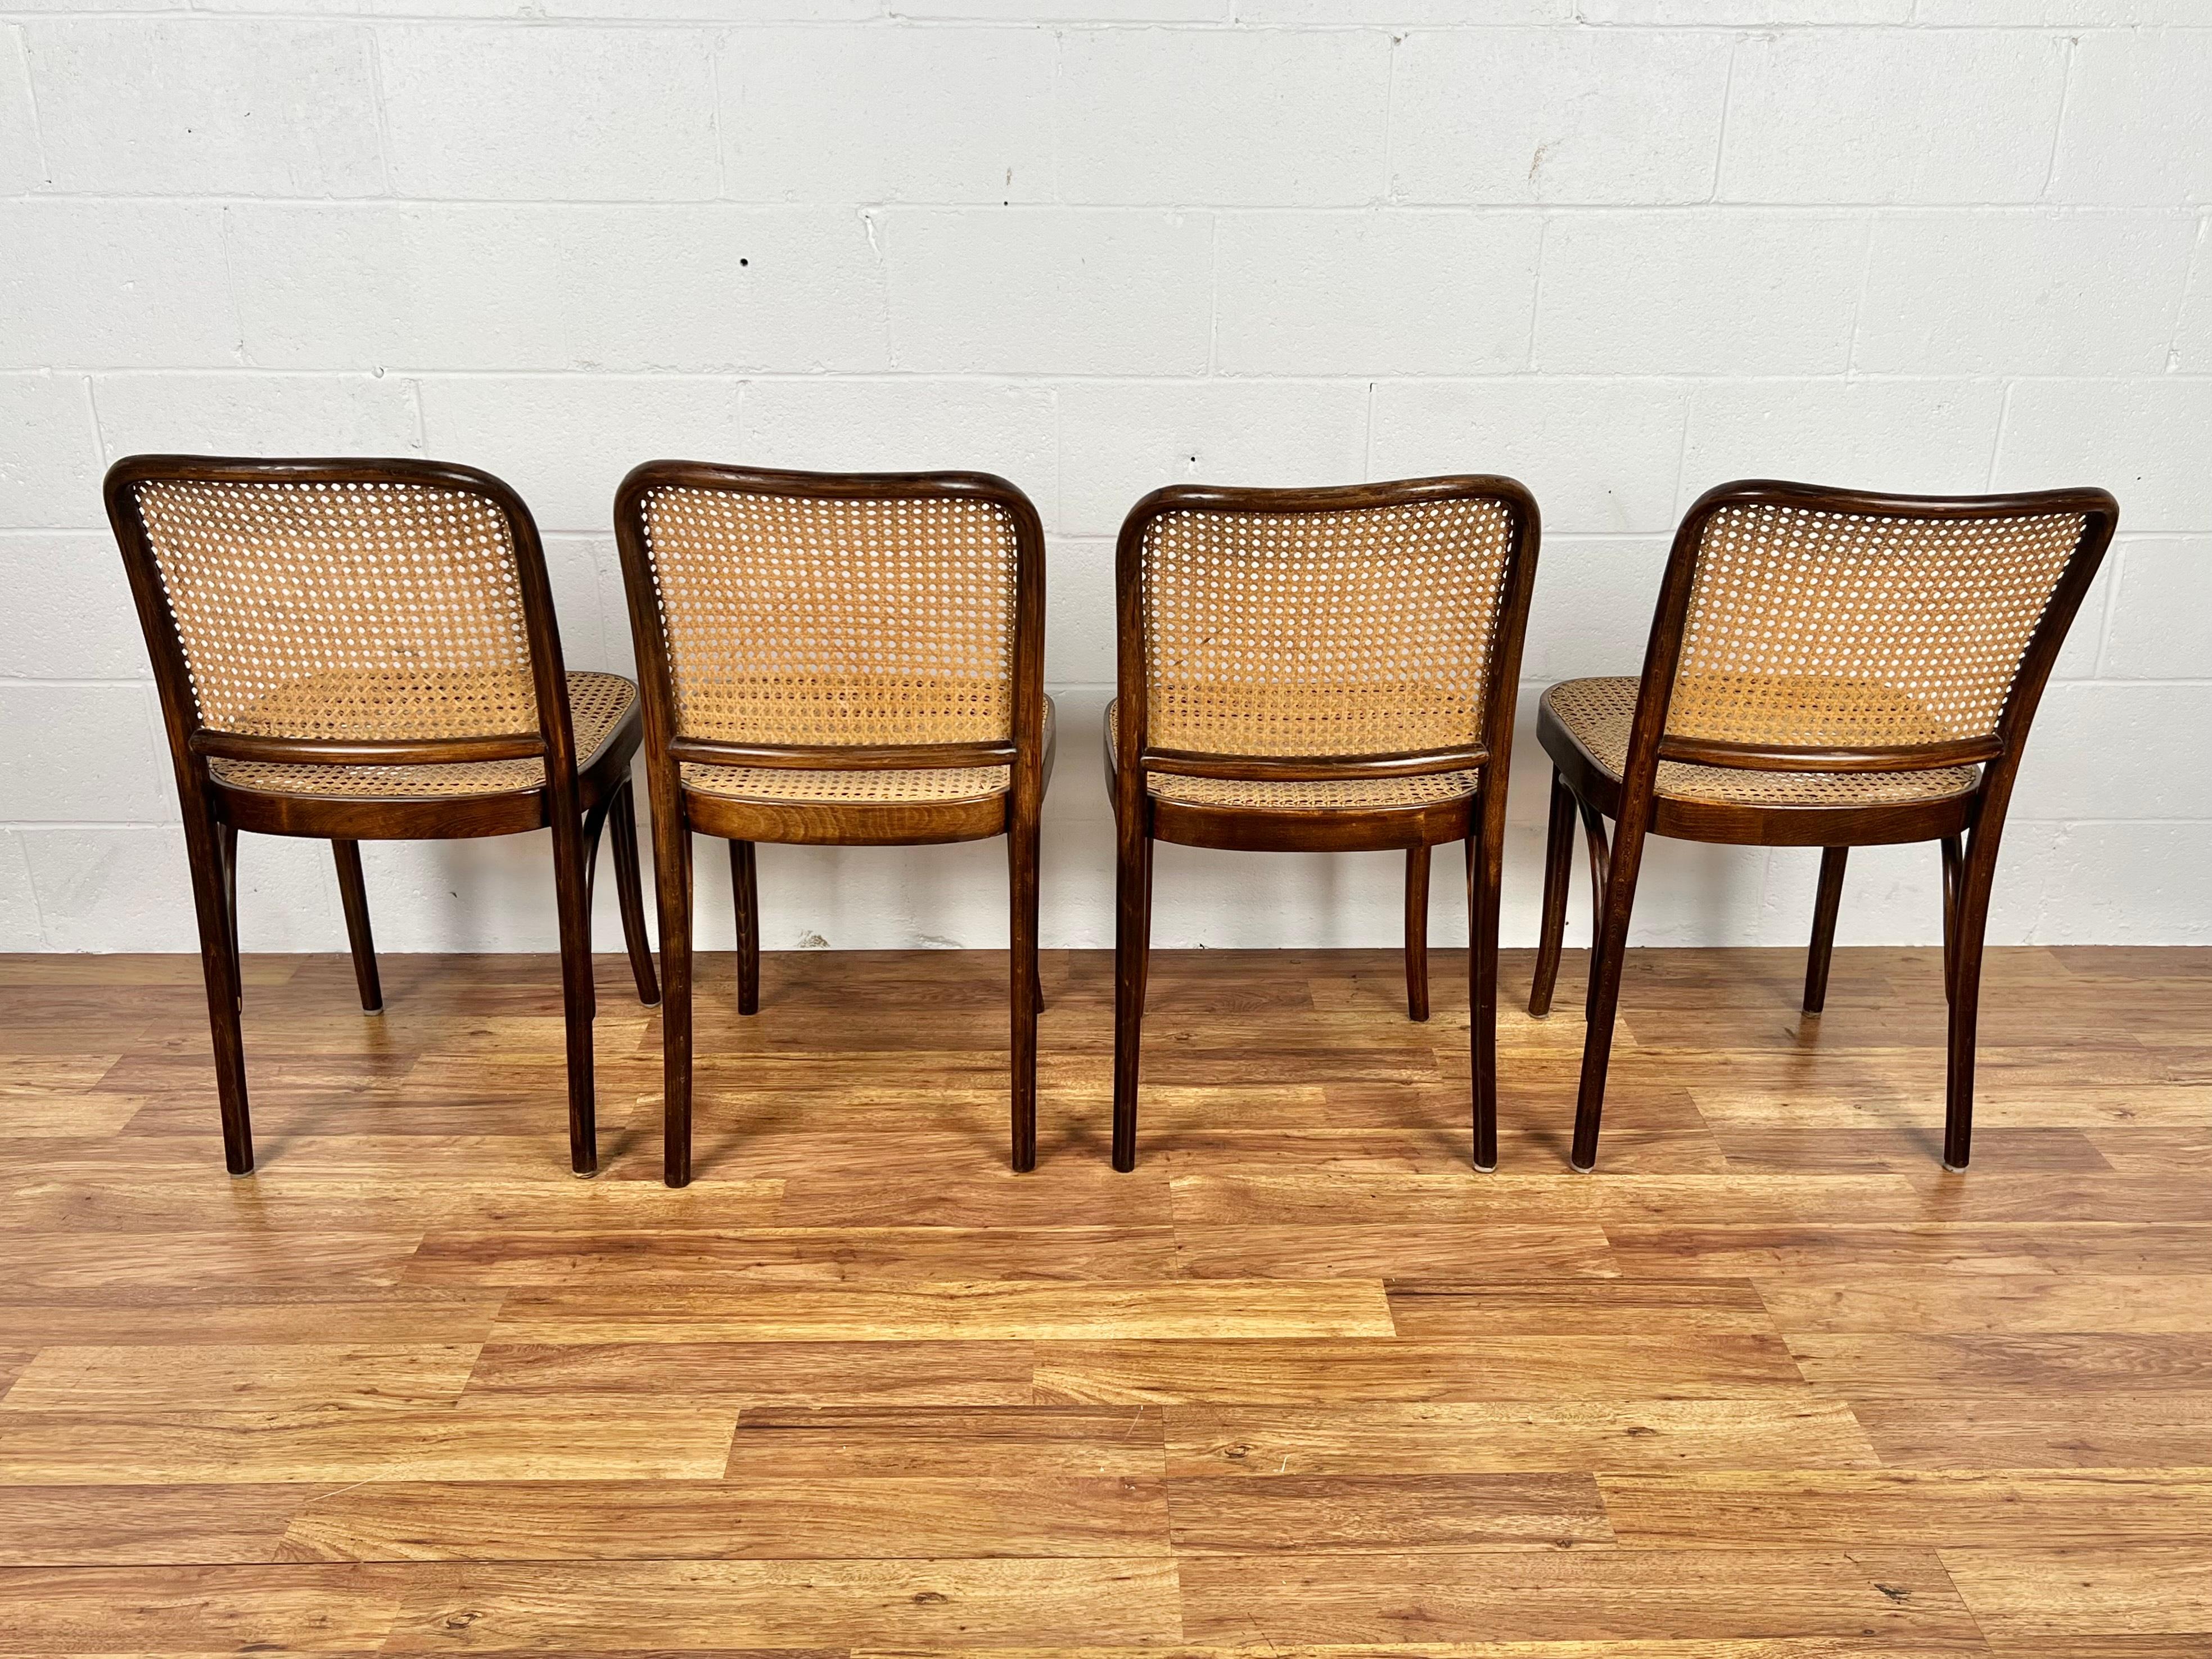 20th Century 20th century Josef Hoffmann bentwood hand caned FMG Prague chairs made in Poland